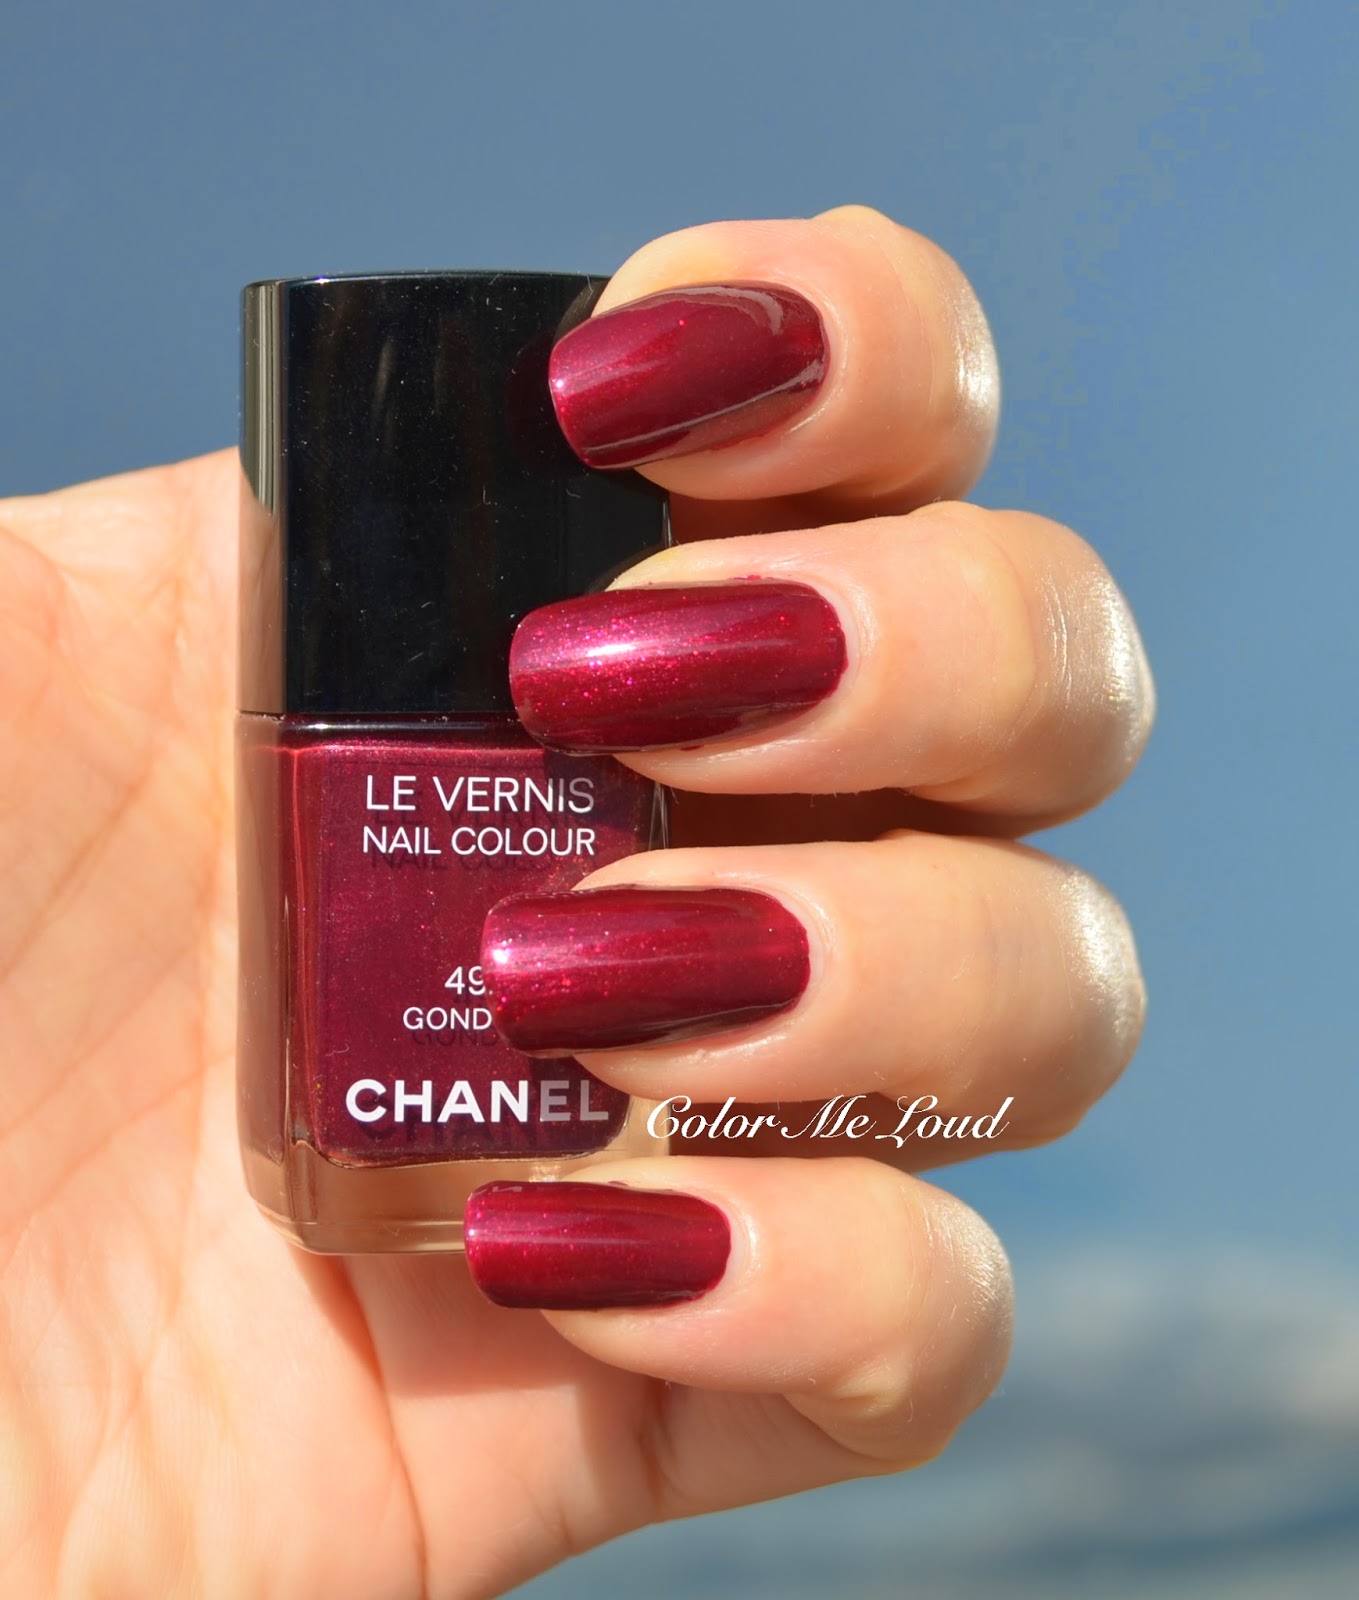 Chanel Le Vernis Long Wear Nail Colour Reds, Review, Swatch